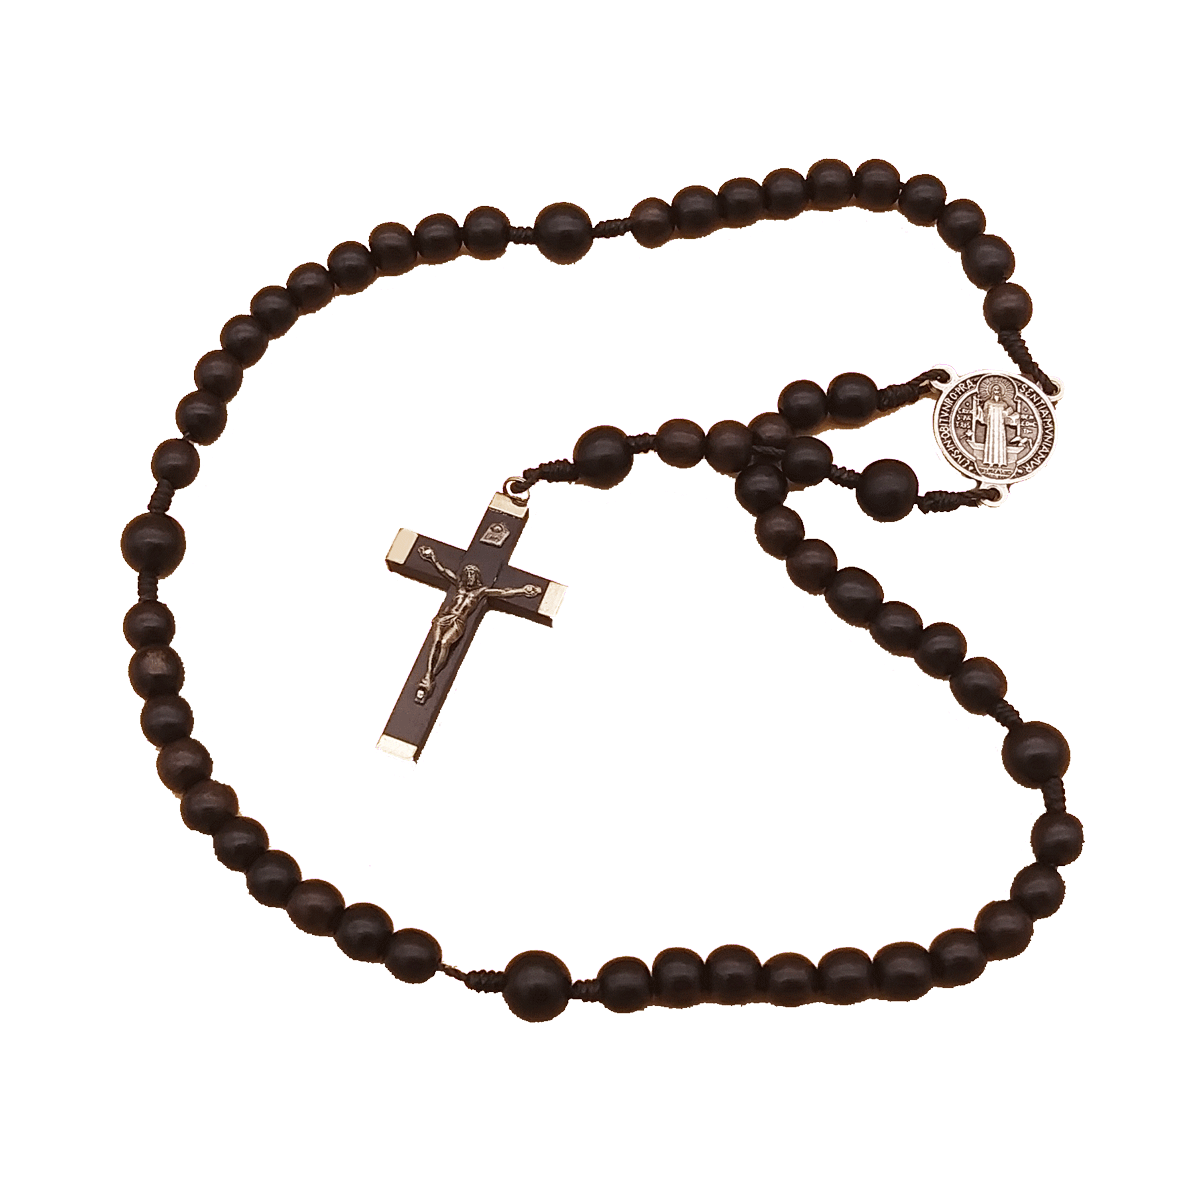 Our Lady of Grace 8MM Brown Wood Bead Corded Prayer Rosary, 20 Inch 